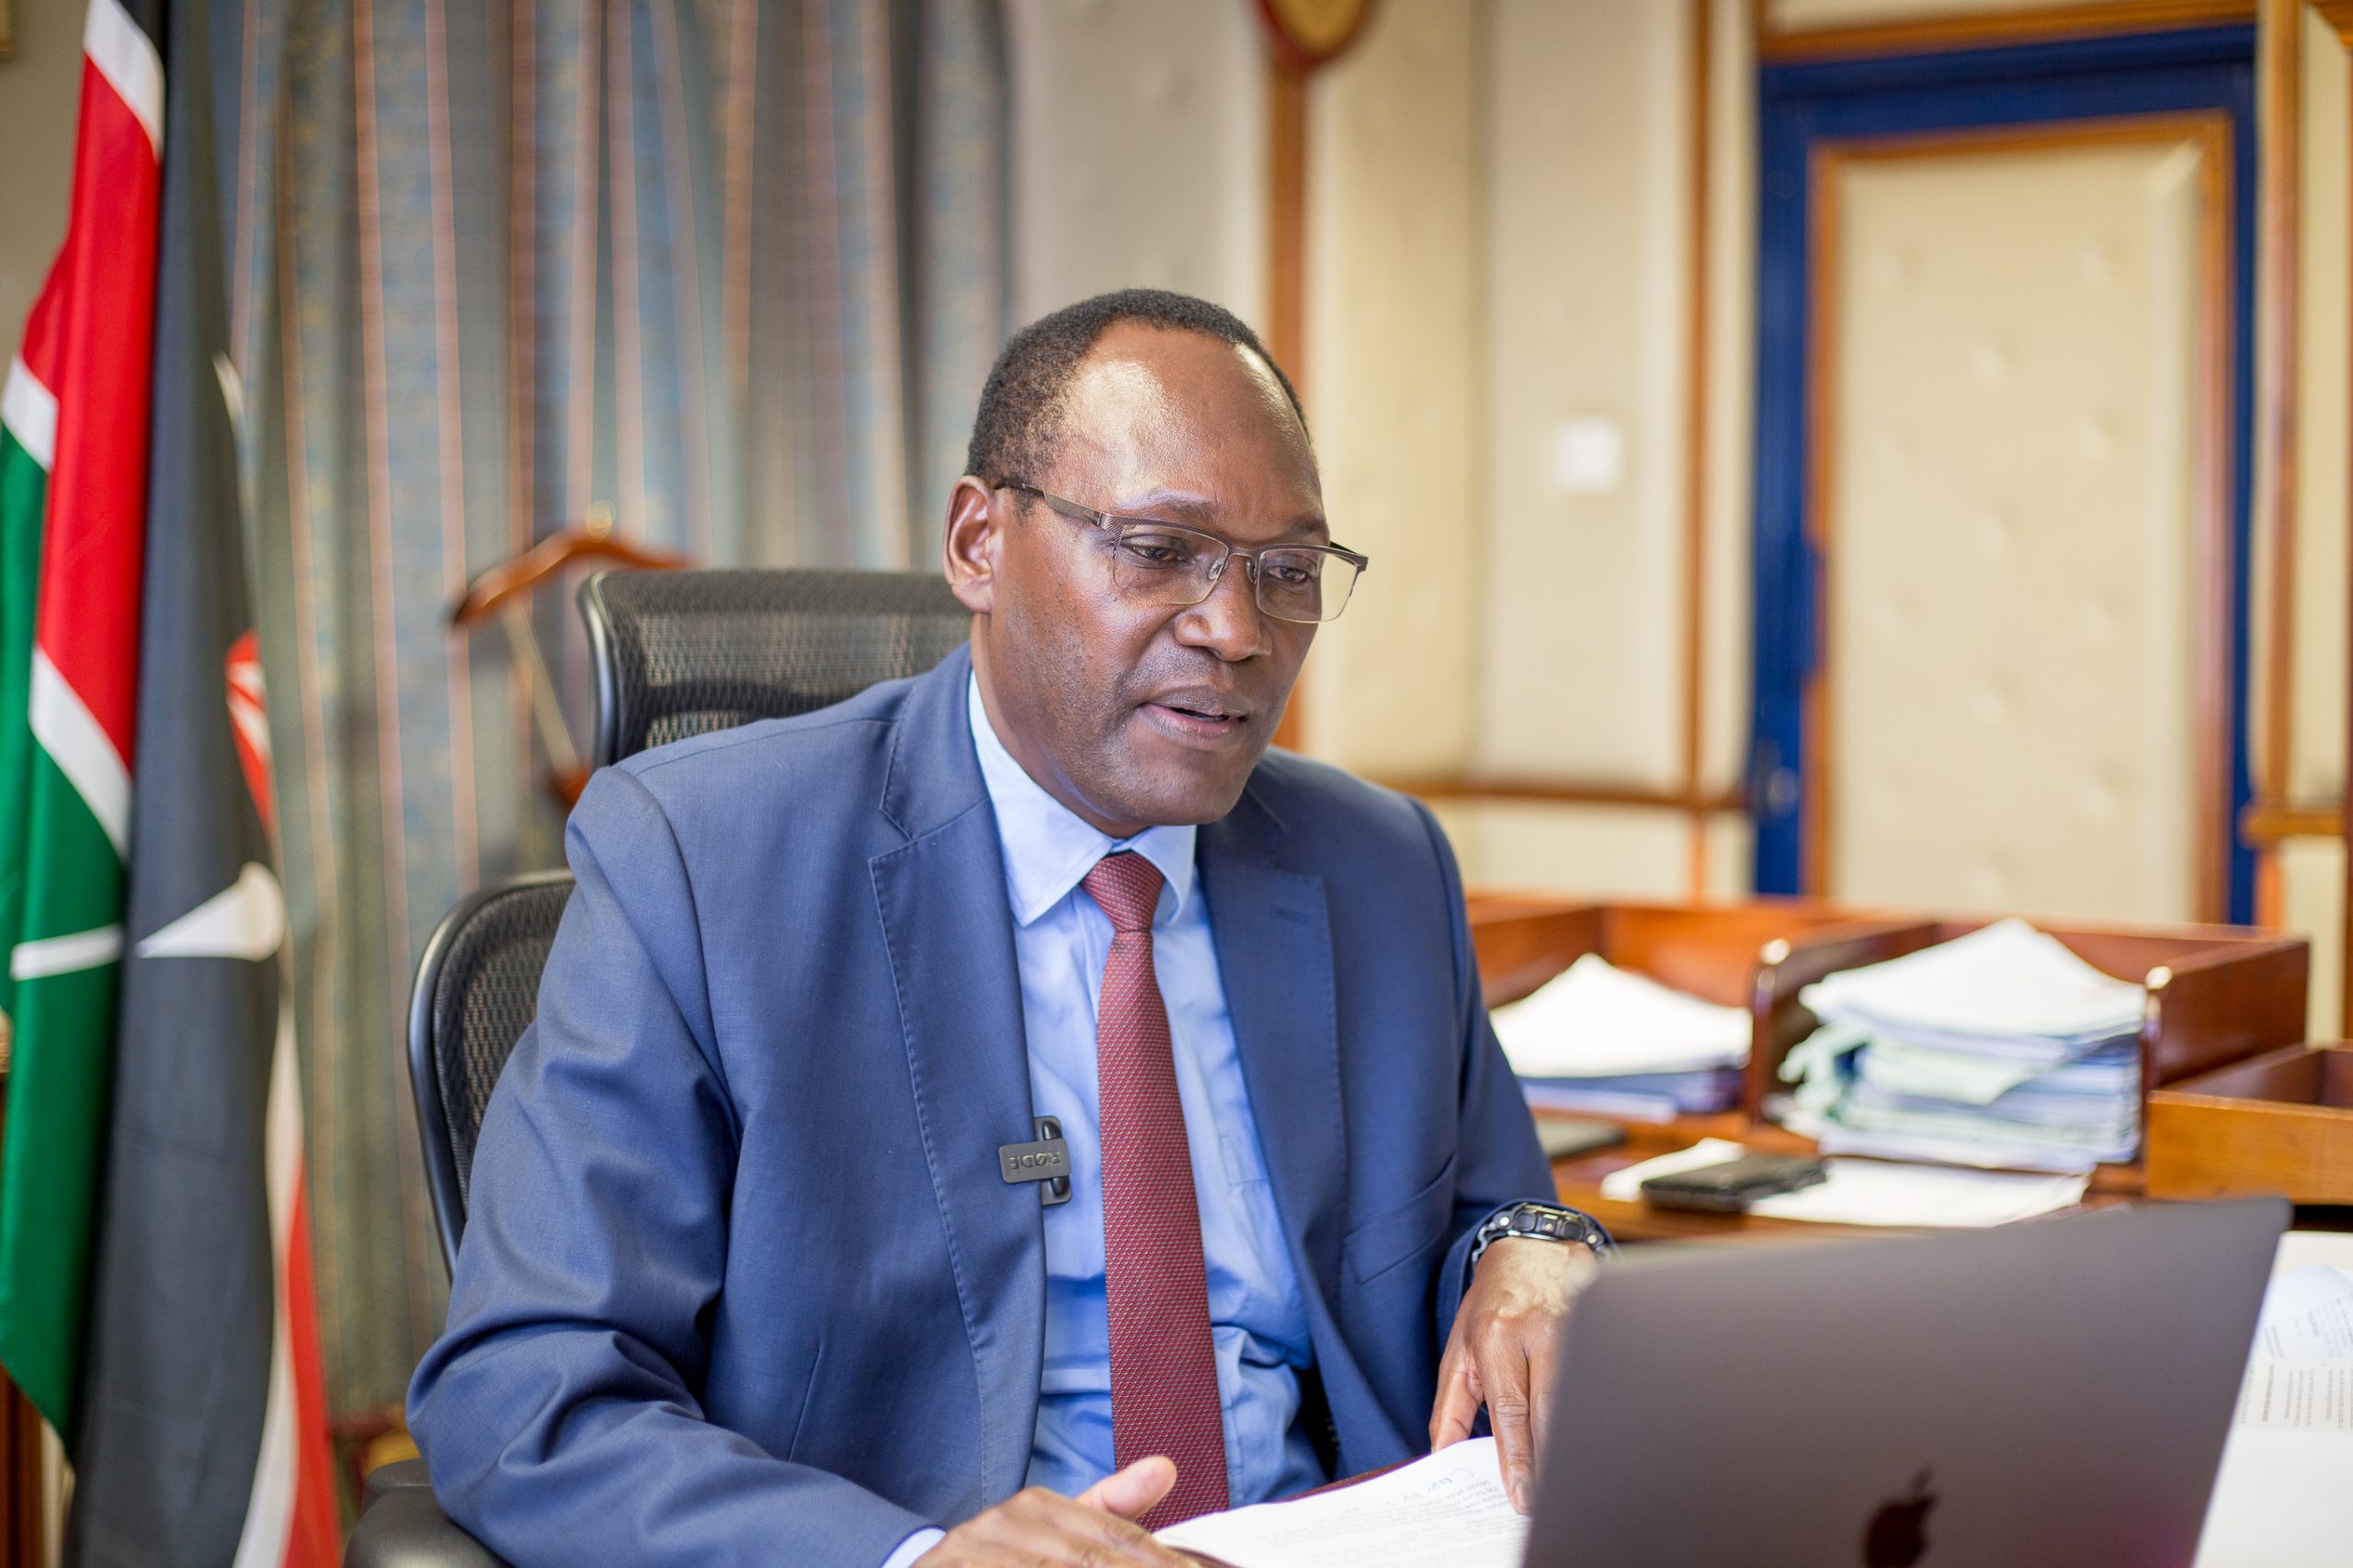 Ministry of Environment and Forestry Principal Secretary Dr. Chris Kiptoo